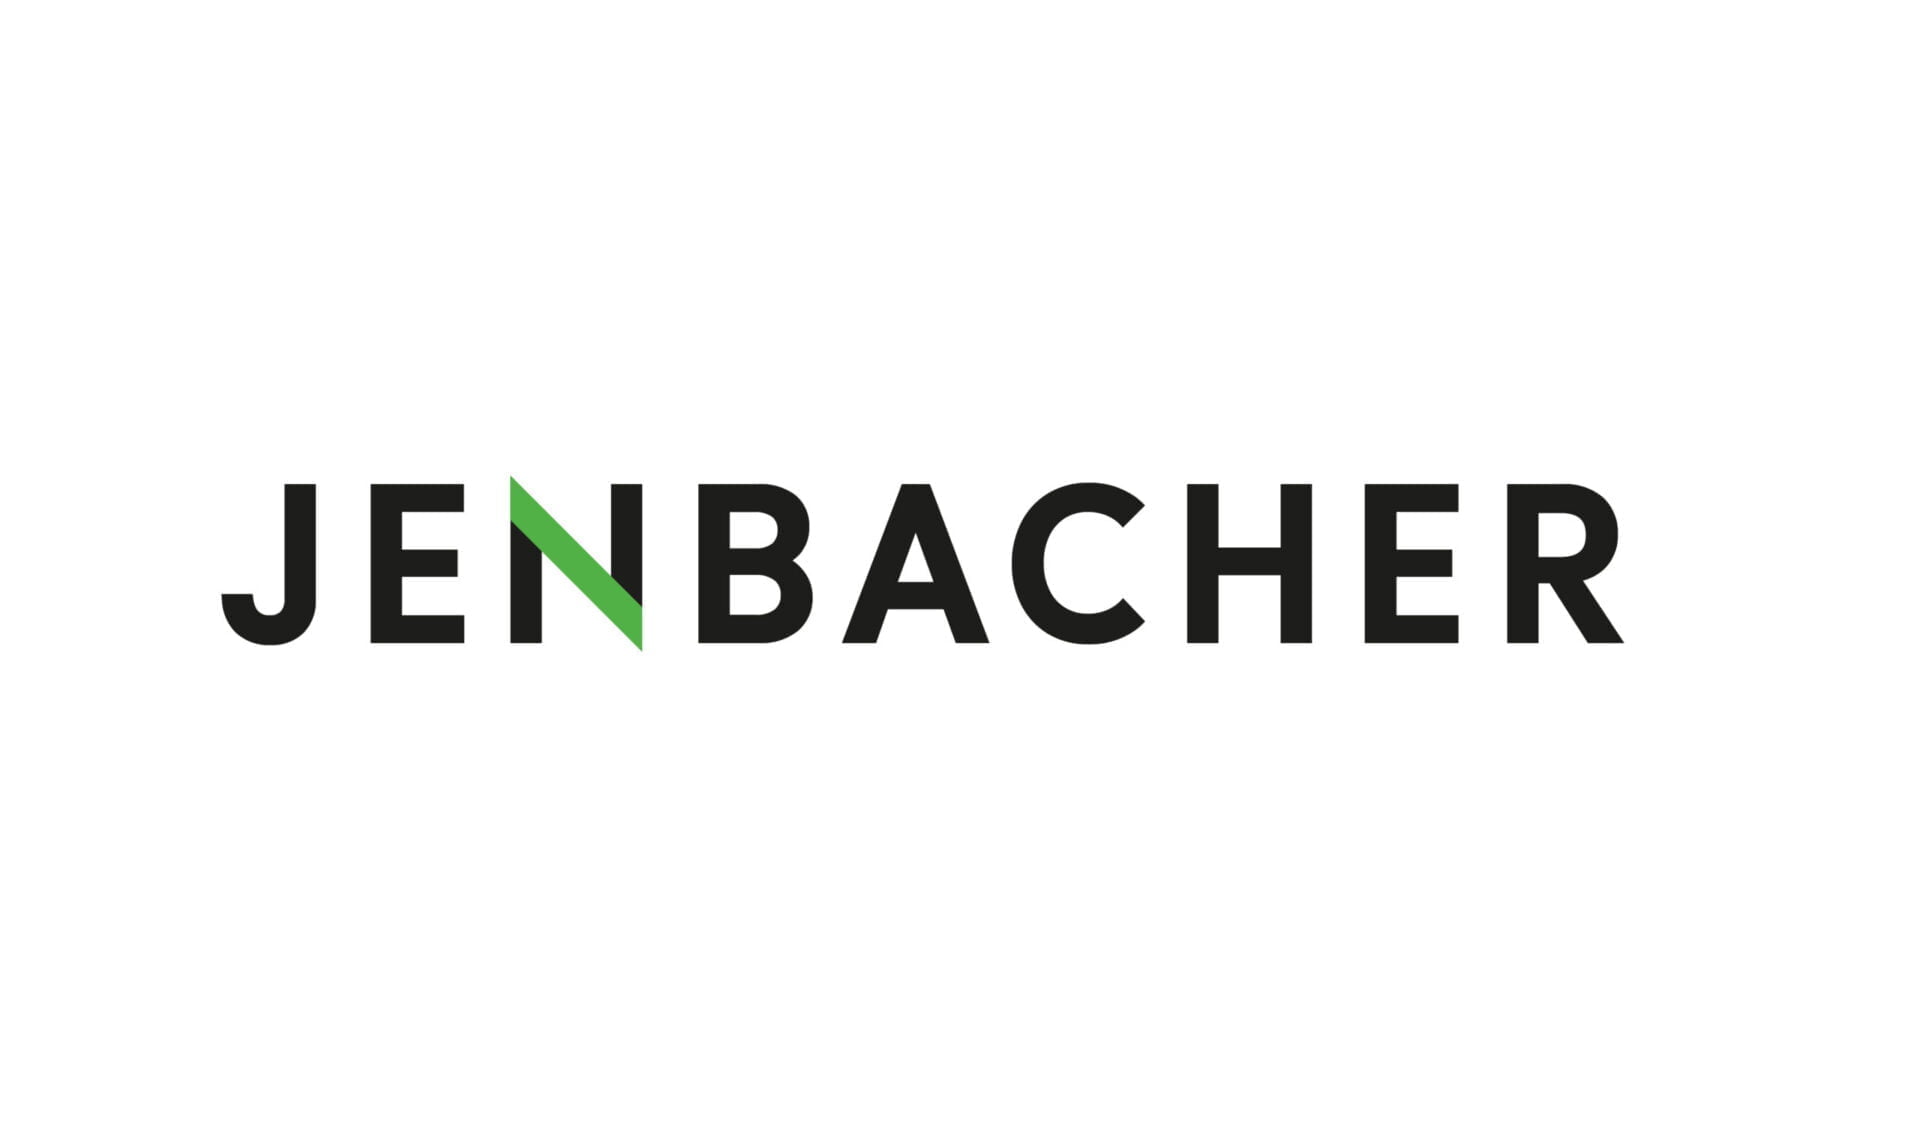 Jenbacher logo with black text and green diagonal stripe on the N